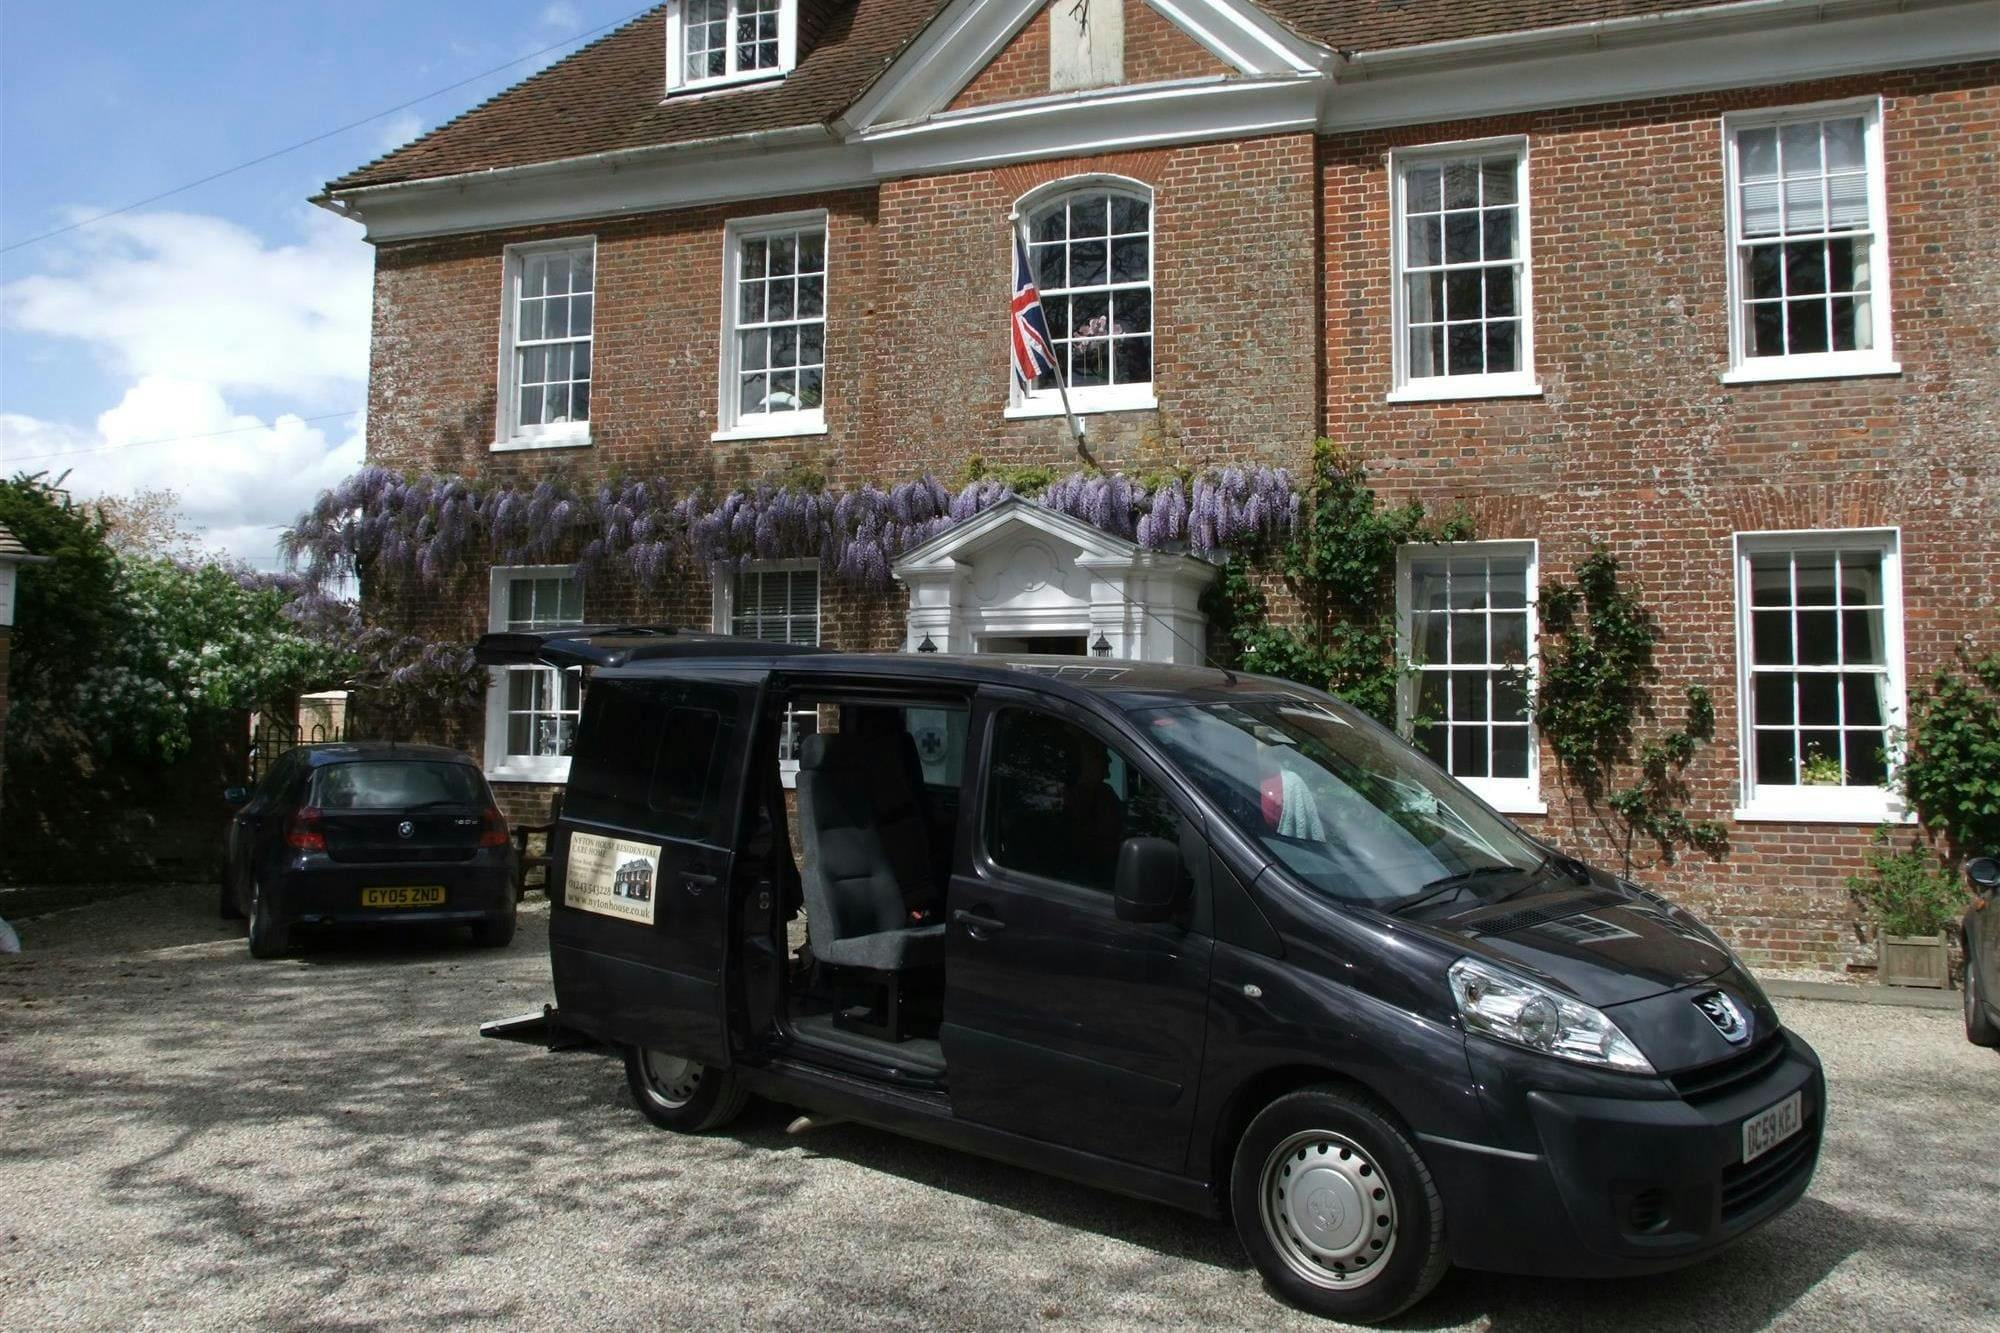 Transport at Nyton House Residential Care Home, Chichester, West Sussex